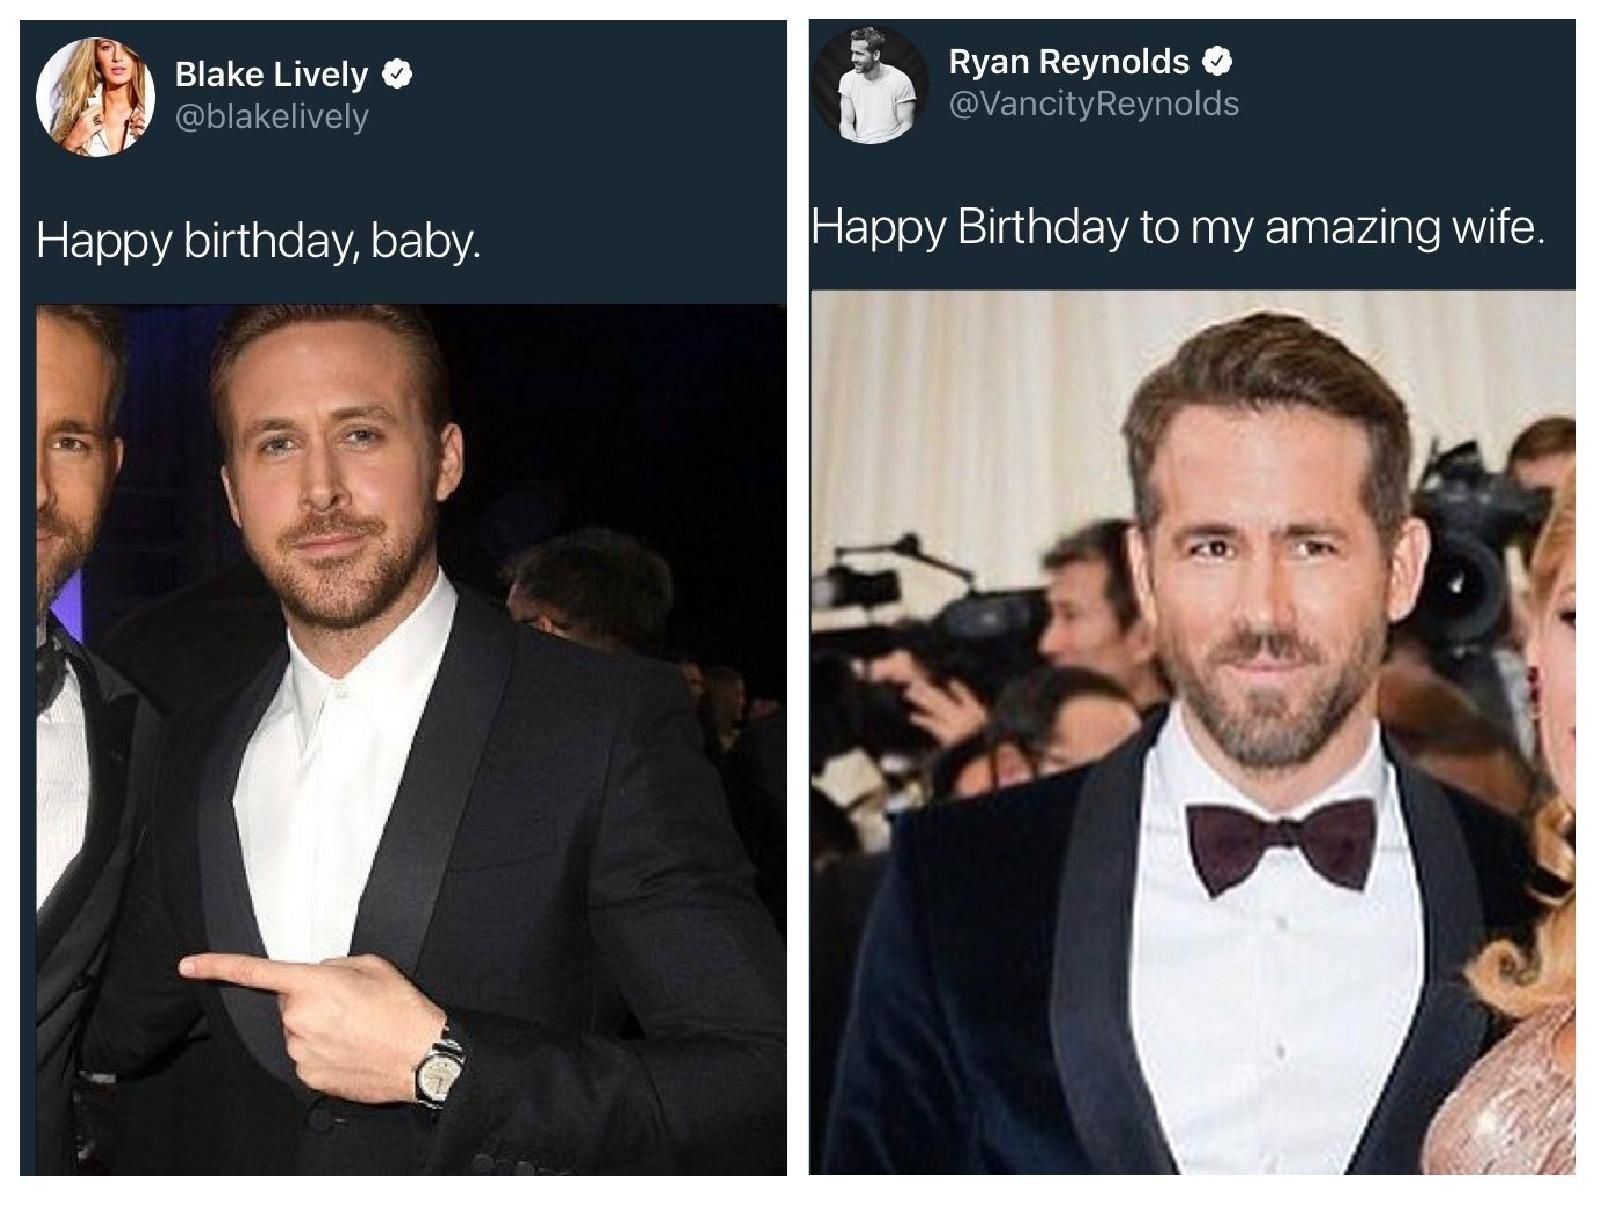 The Way Blake Lively And Ryan Reynolds Say Happy BirtHDay To Each